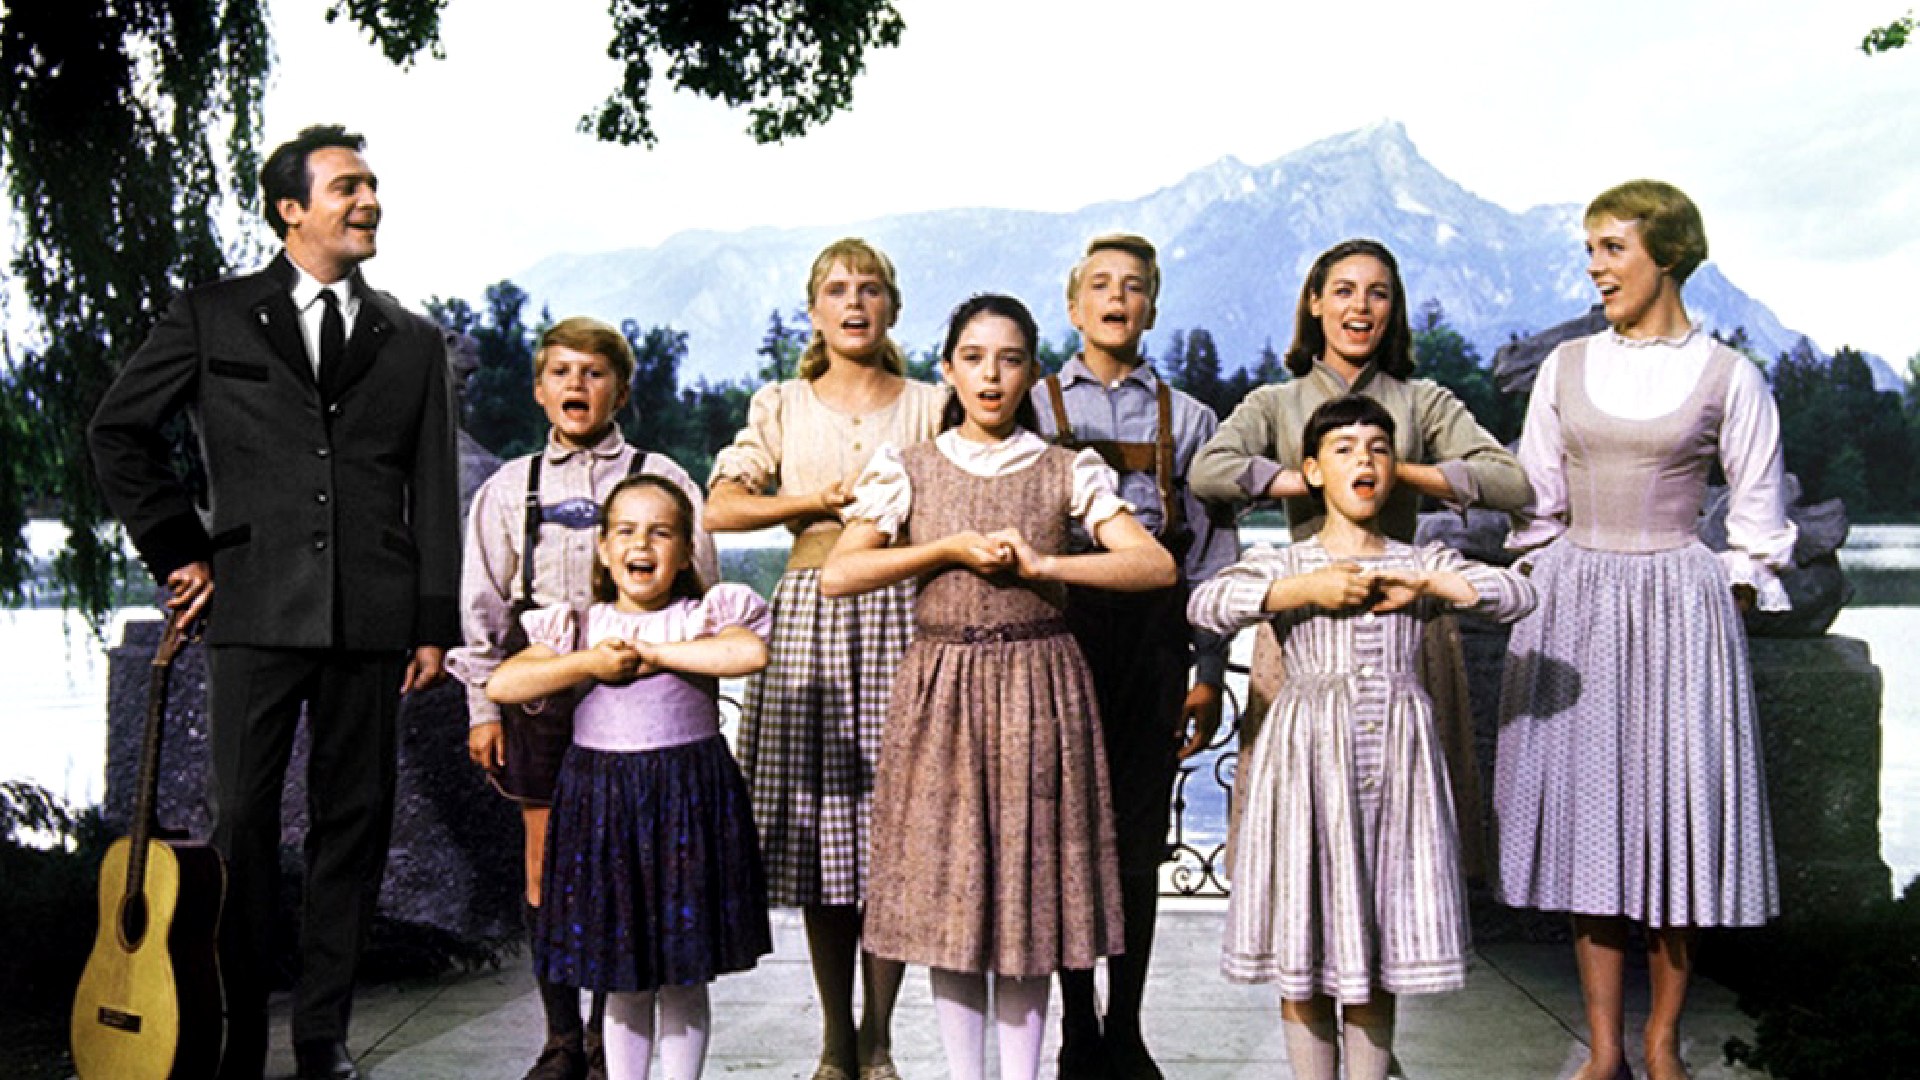 A Re-Released ‘The Sound Of Music’ Soundtrack Will Include 40+ New Songs